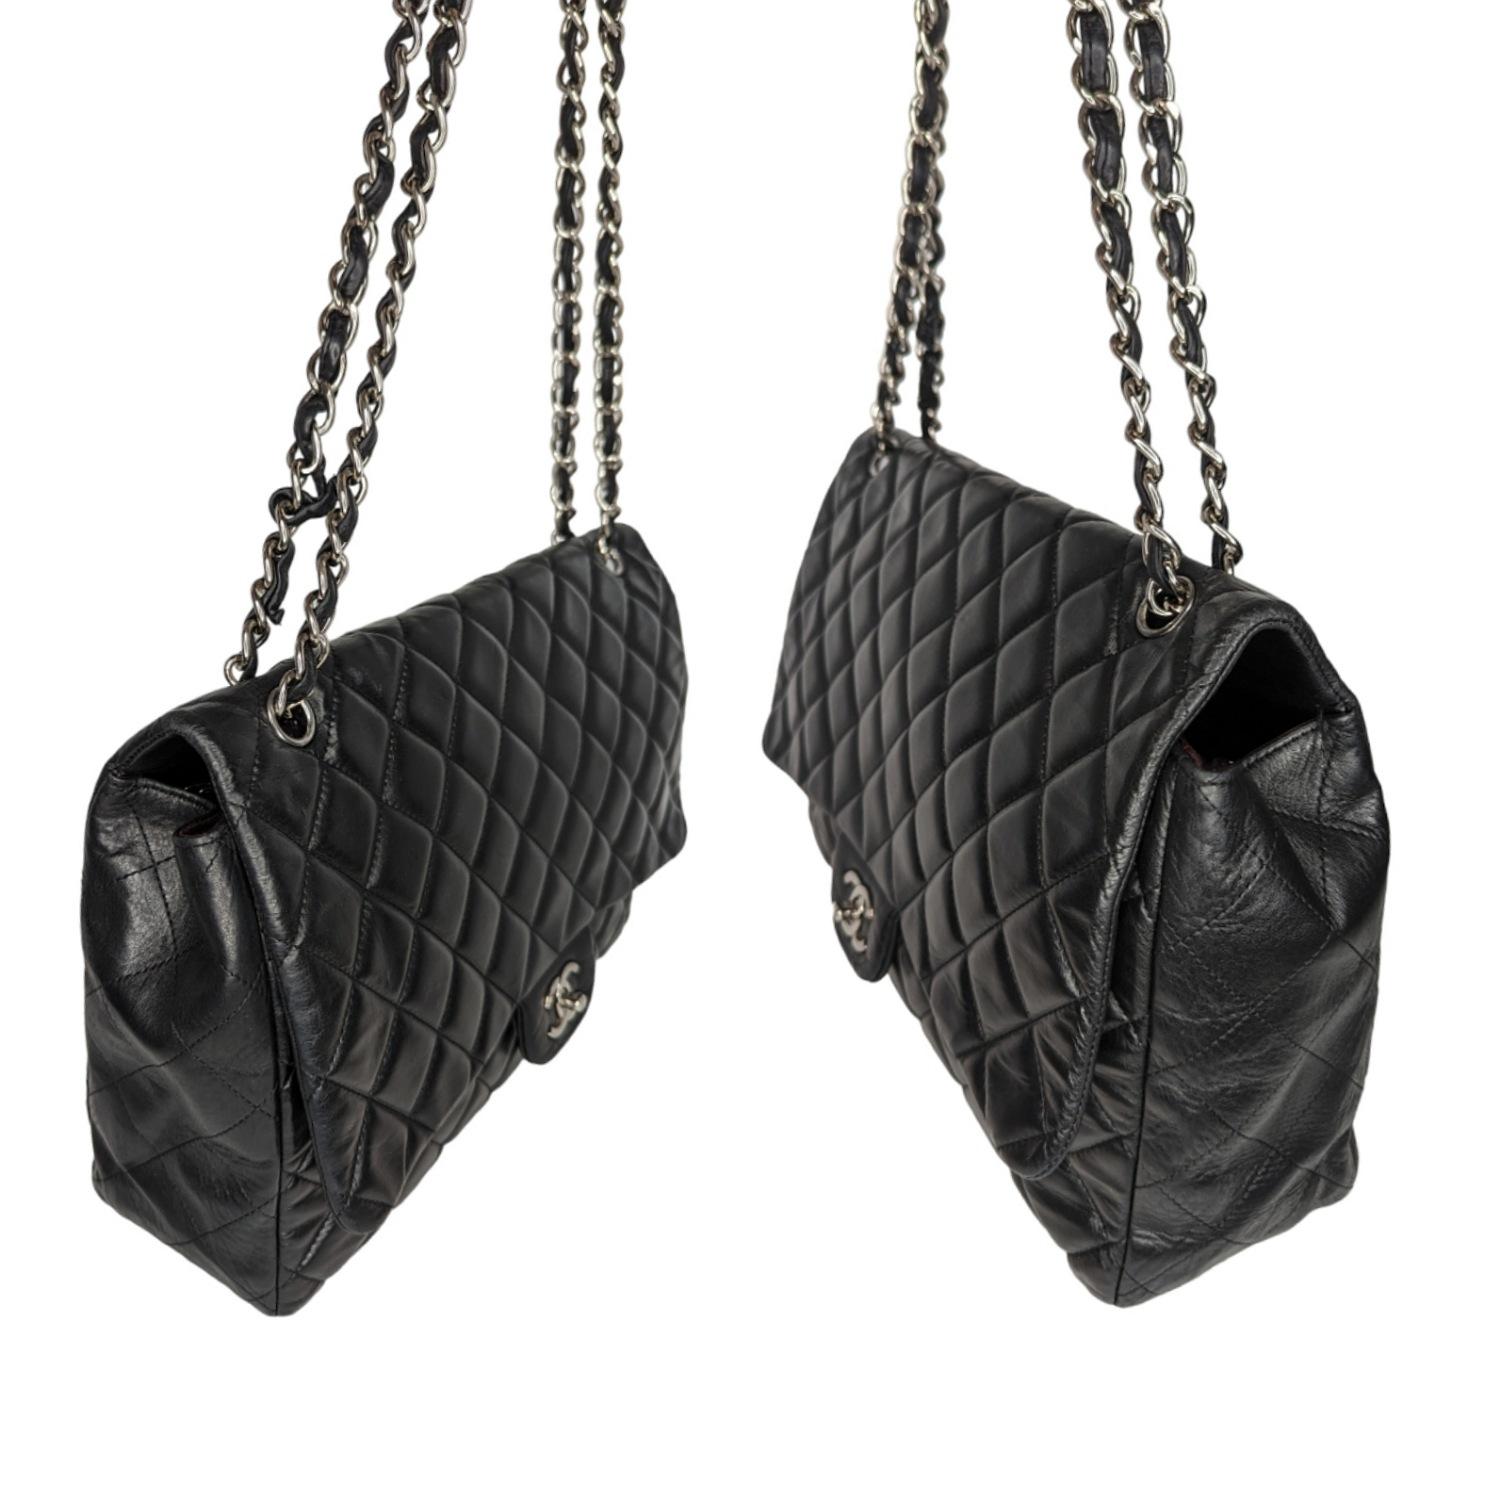 Chanel Lambskin Quilted Maxi Classic Single Flap Black In Good Condition For Sale In Scottsdale, AZ